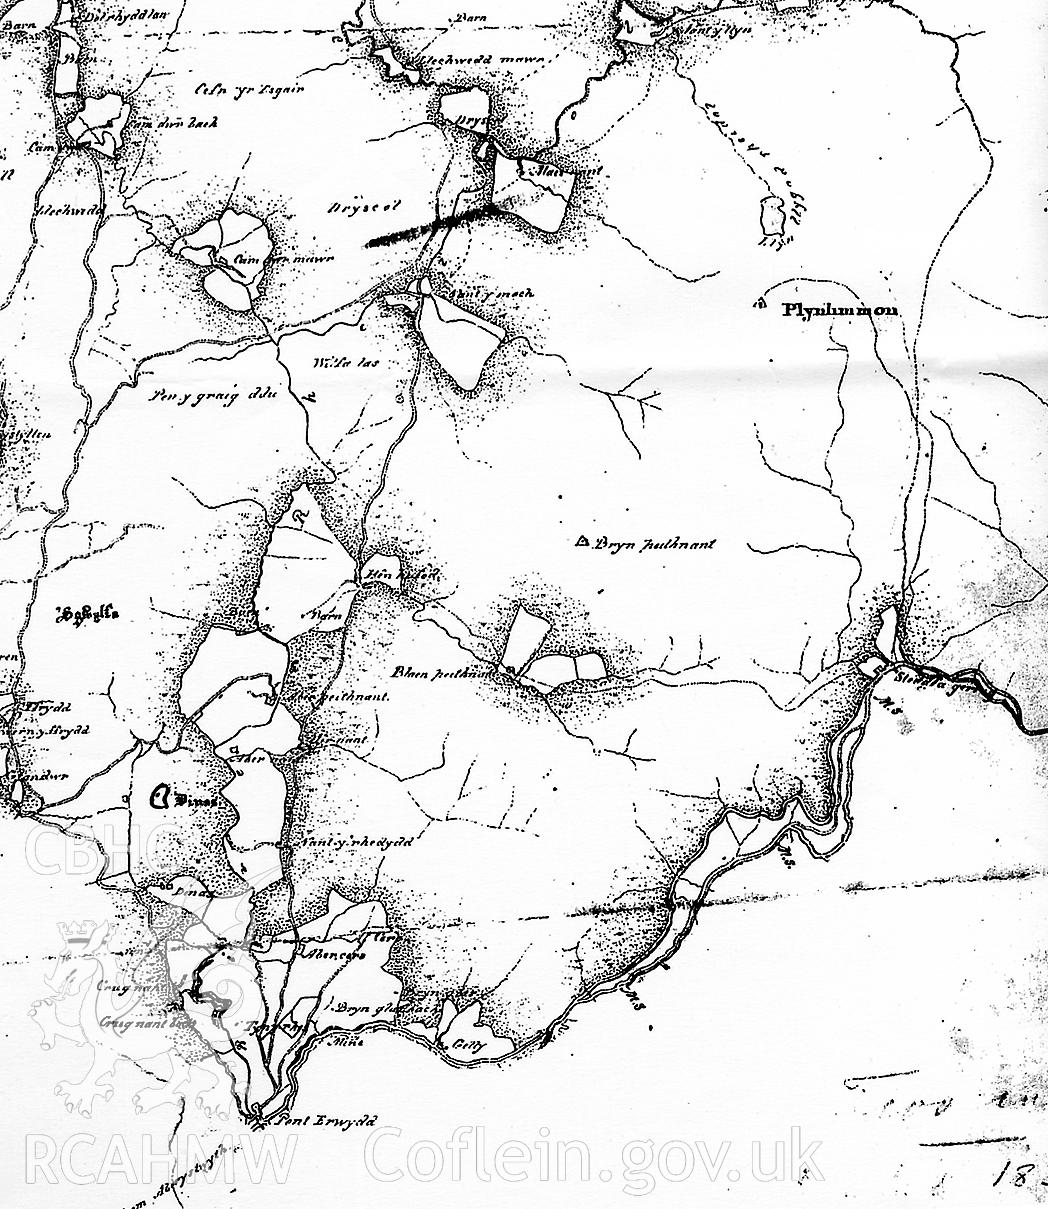 Part of an 1833 map showing Plynlimon and the surrounding area.